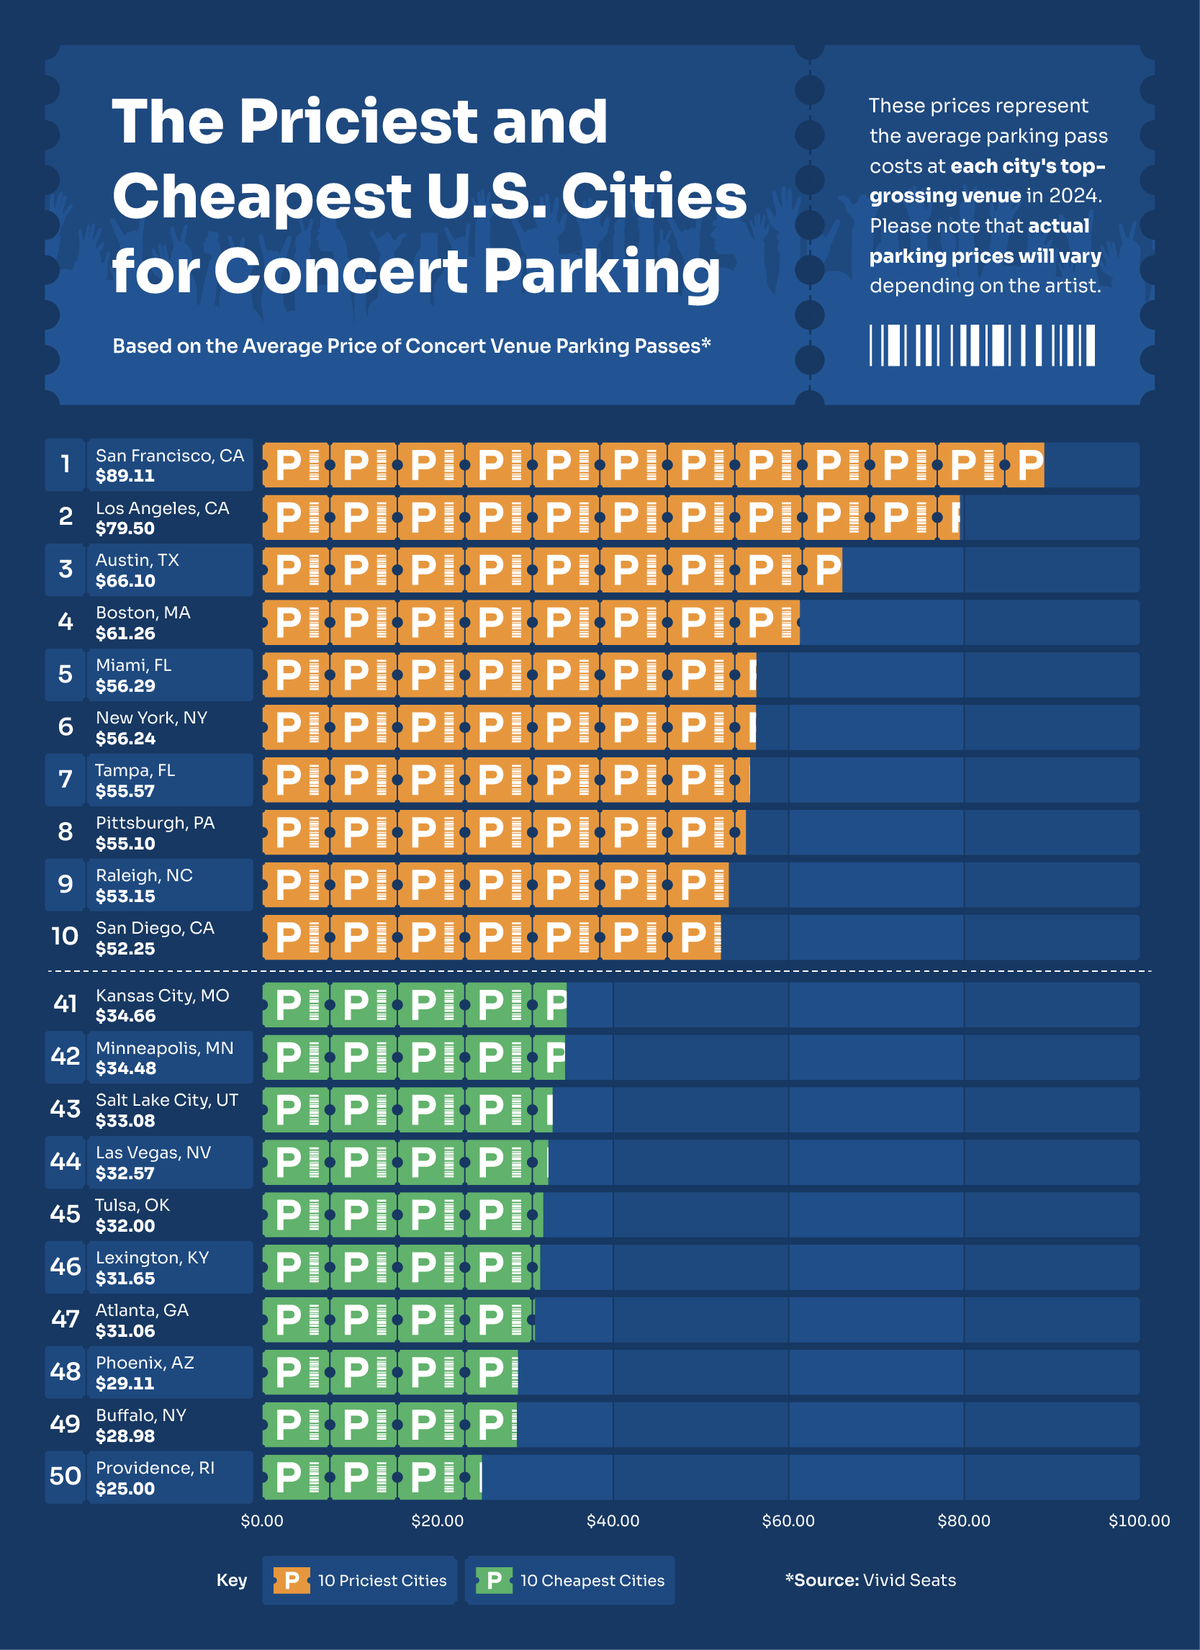 Graphic highlighting the most and least expensive U.S. cities for concert parking